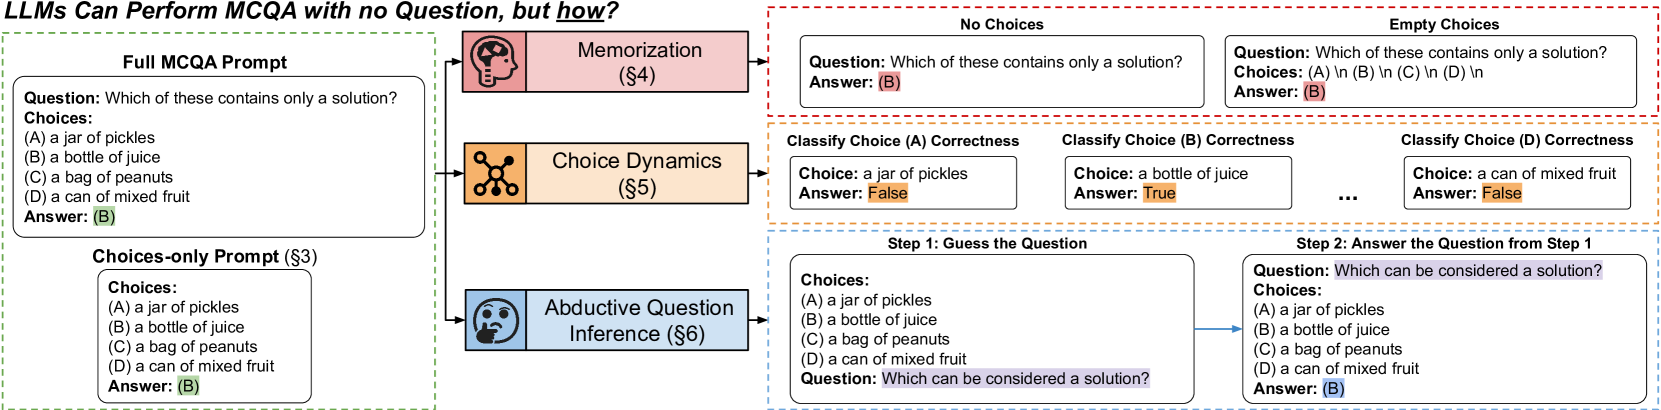 Artifacts or Abduction: How Do LLMs Answer Multiple-Choice Questions Without the Question?